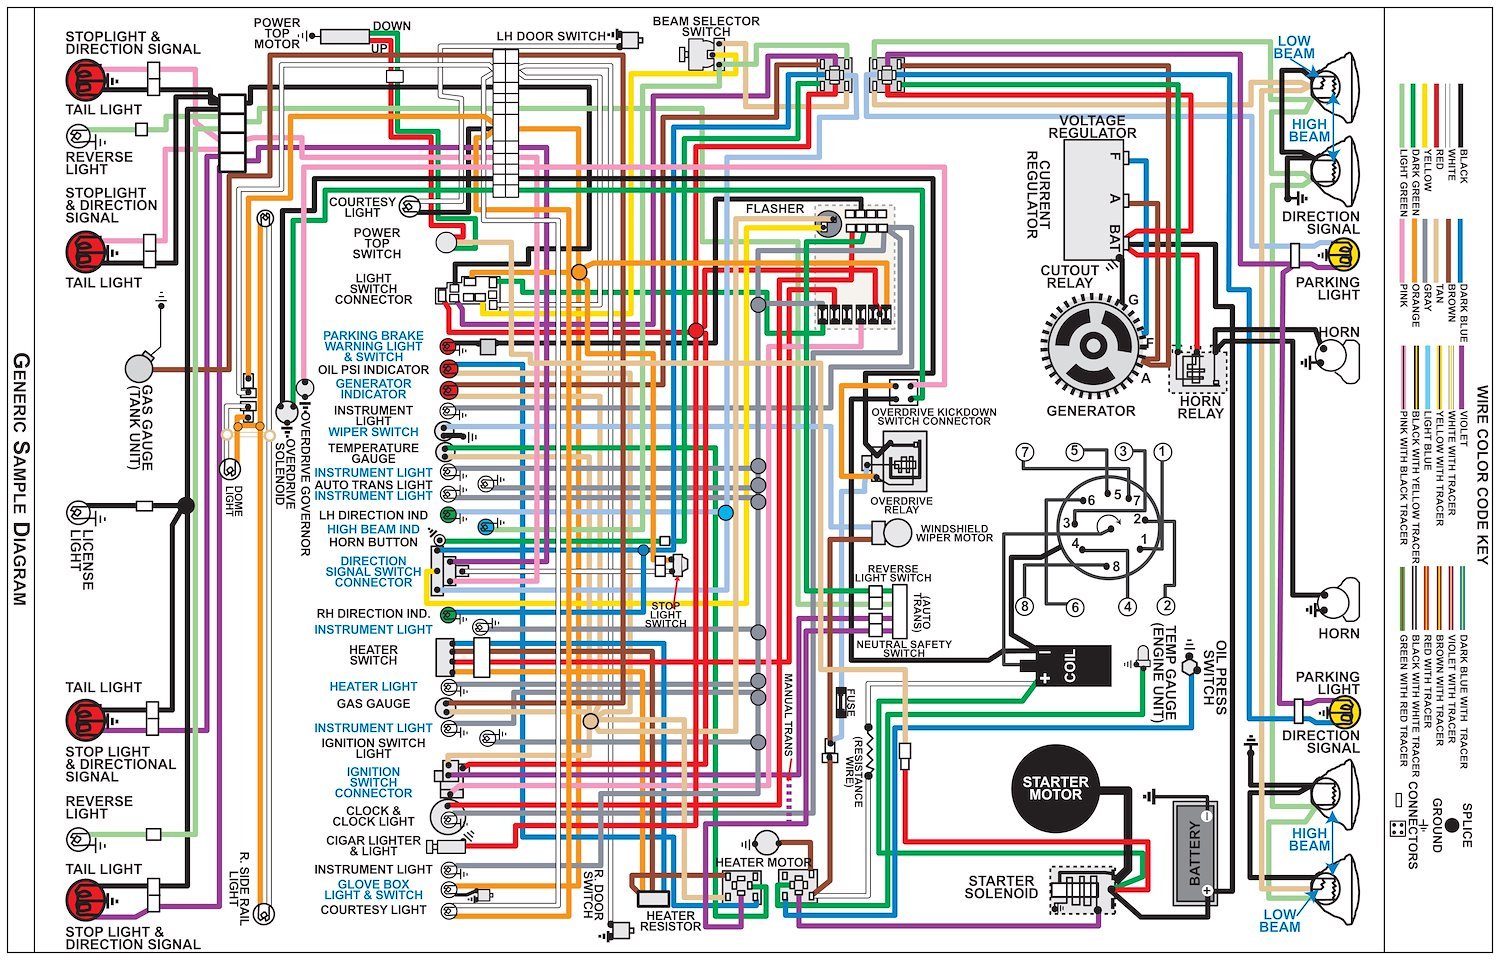 Wiring Diagram for 1965 Ford Mustang, 11 in x 17 in., Laminated